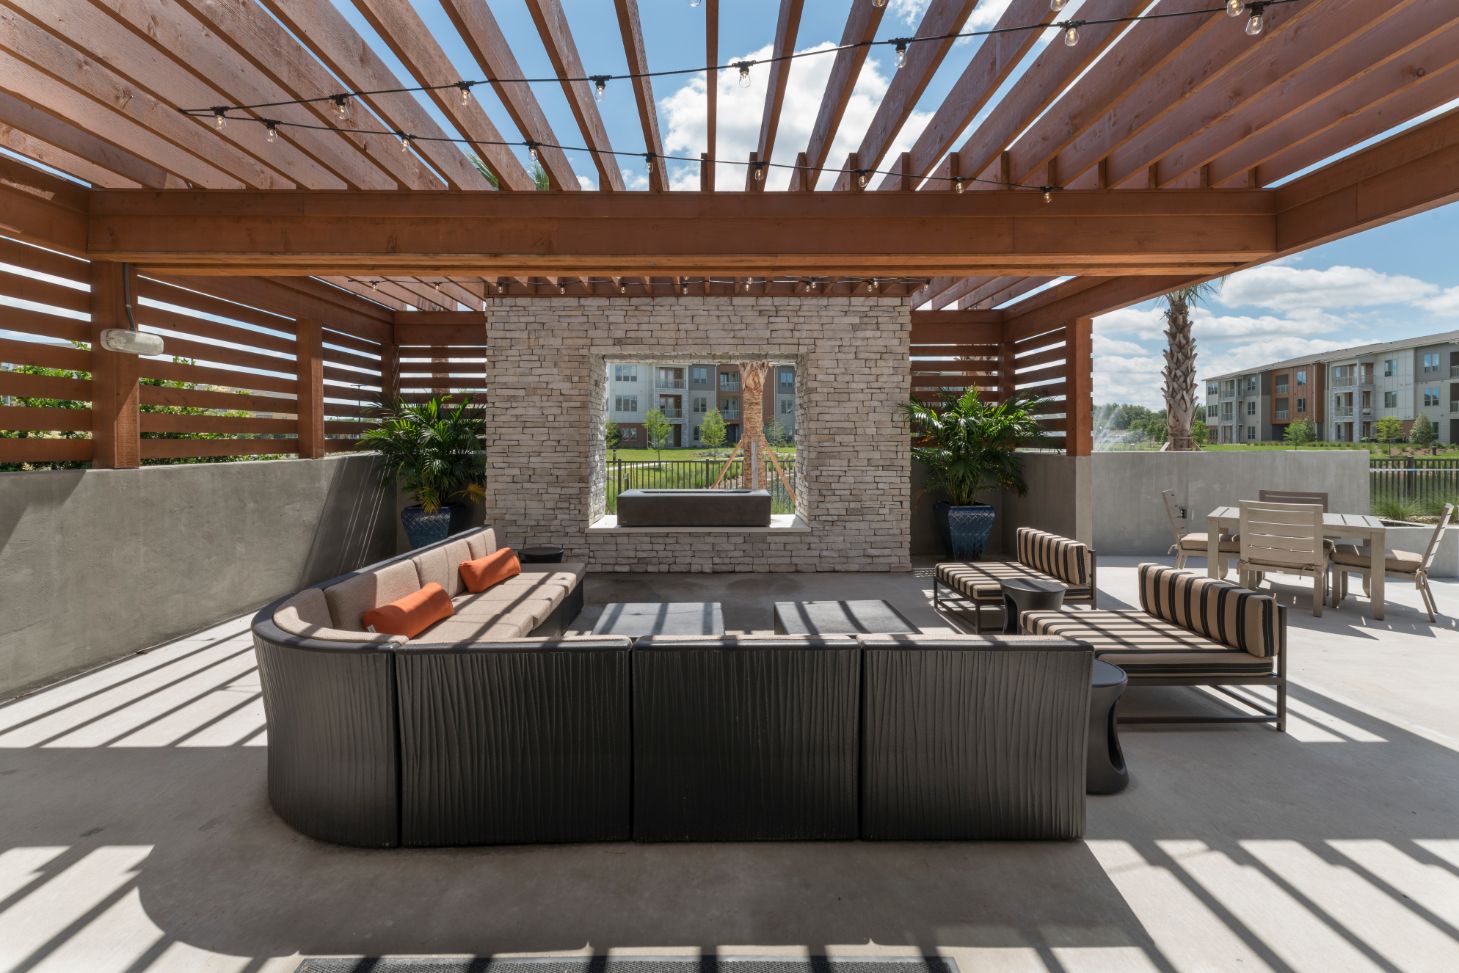 Outdoor seating under pergola, example of hardscaping